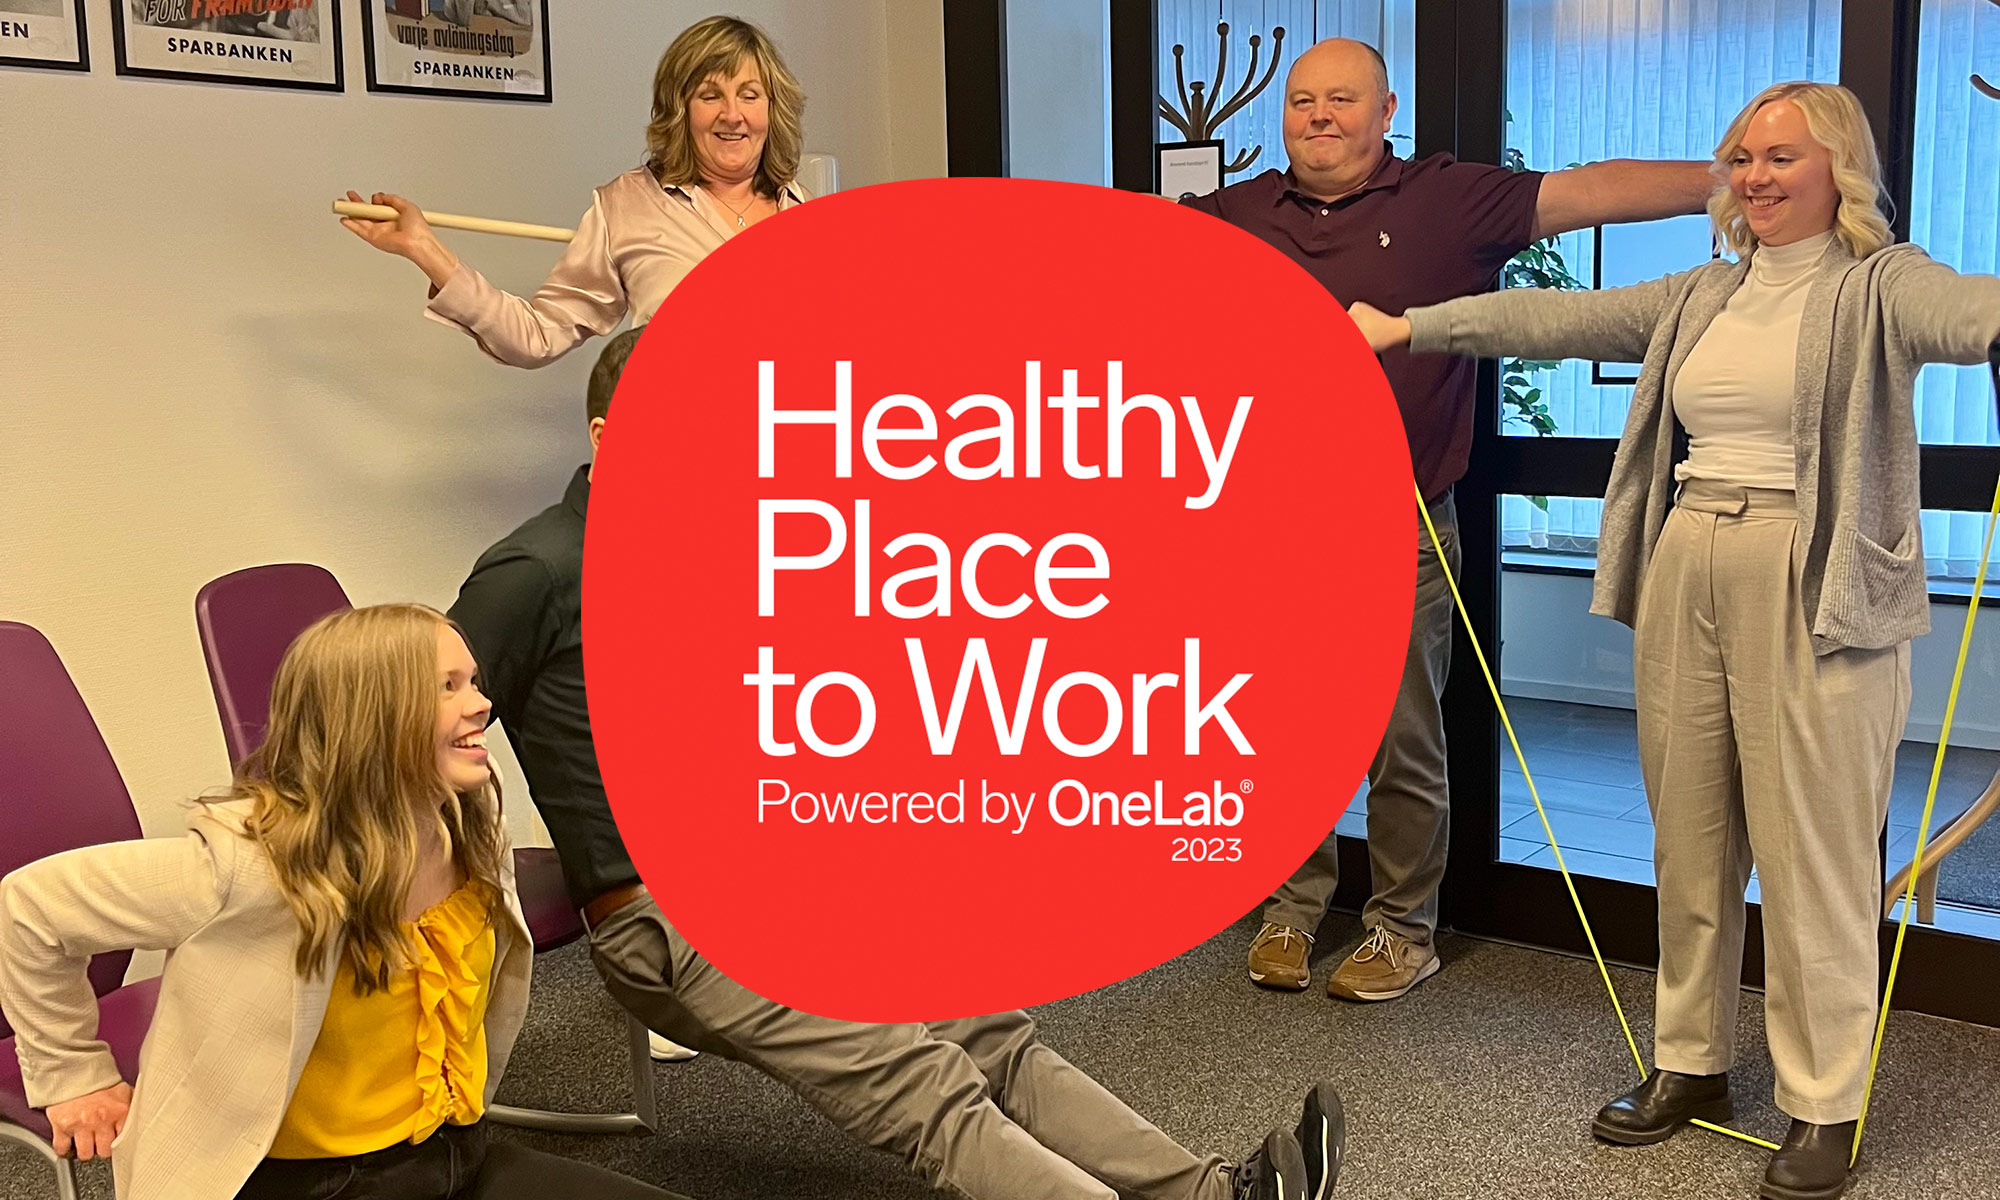 Logo with text: Healthy Place to Work Powered by OneLab 2023. People exercising in the background.